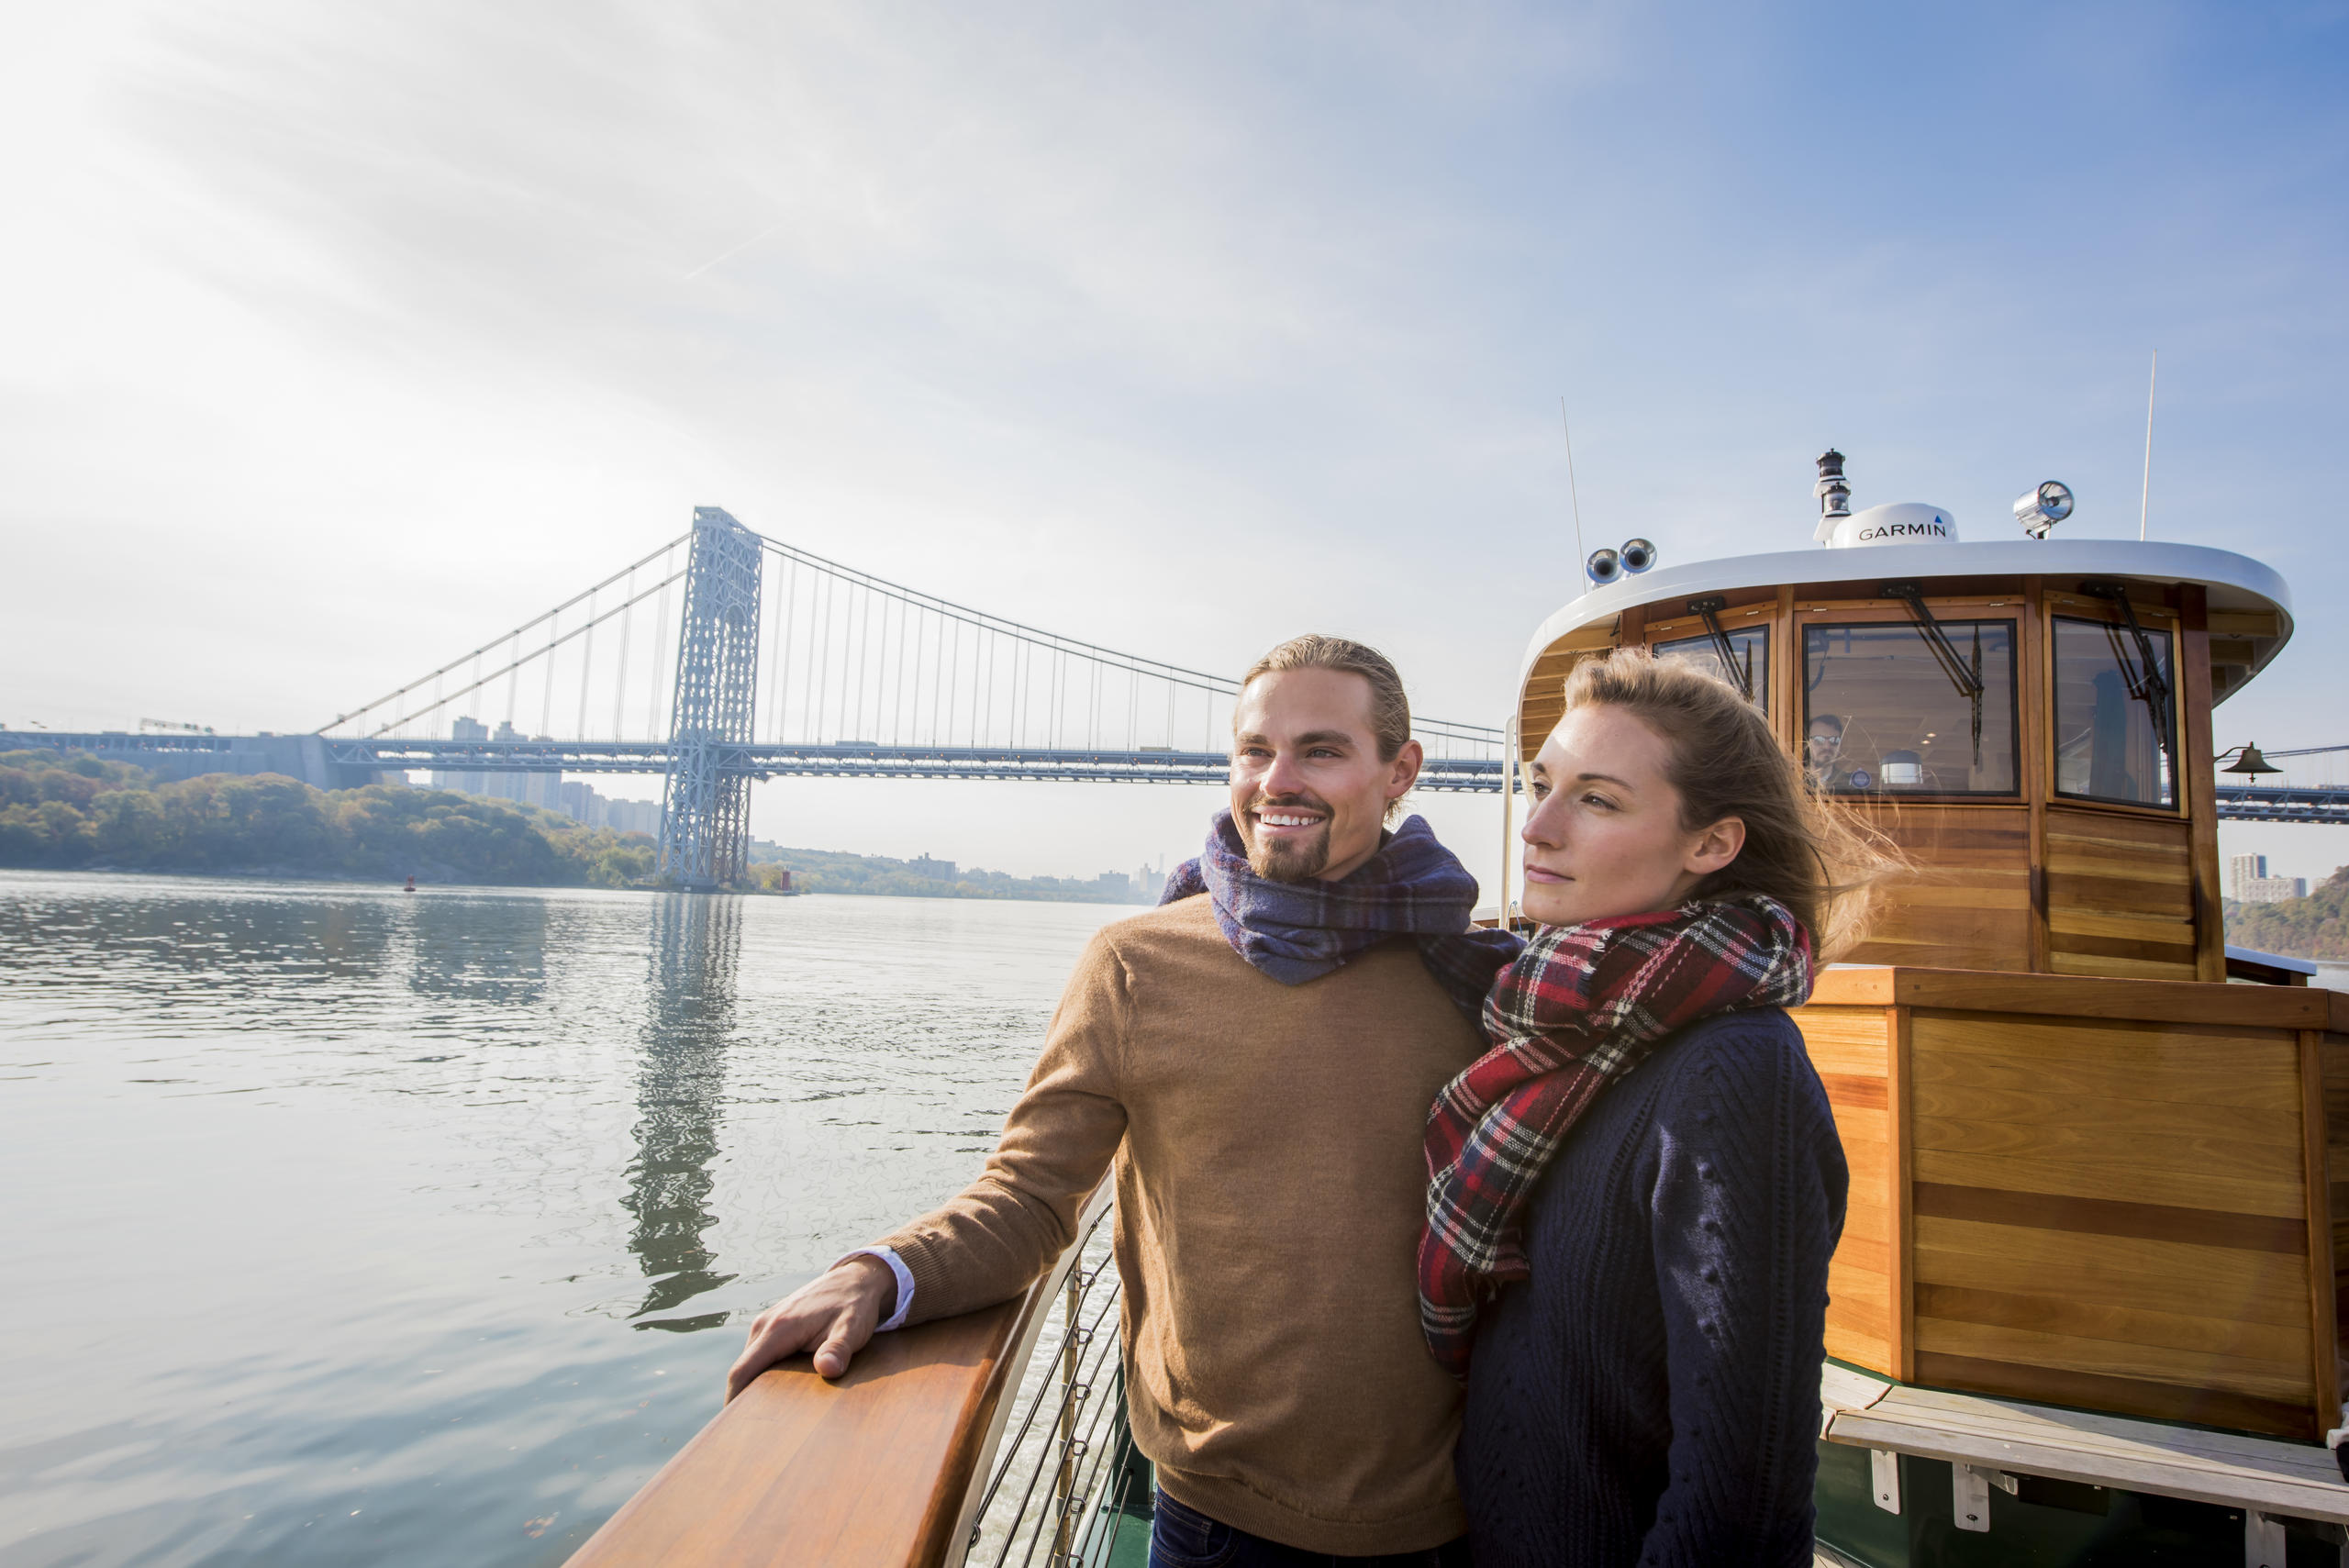 Fall Foliage Brunch Cruise from Chelsea Piers